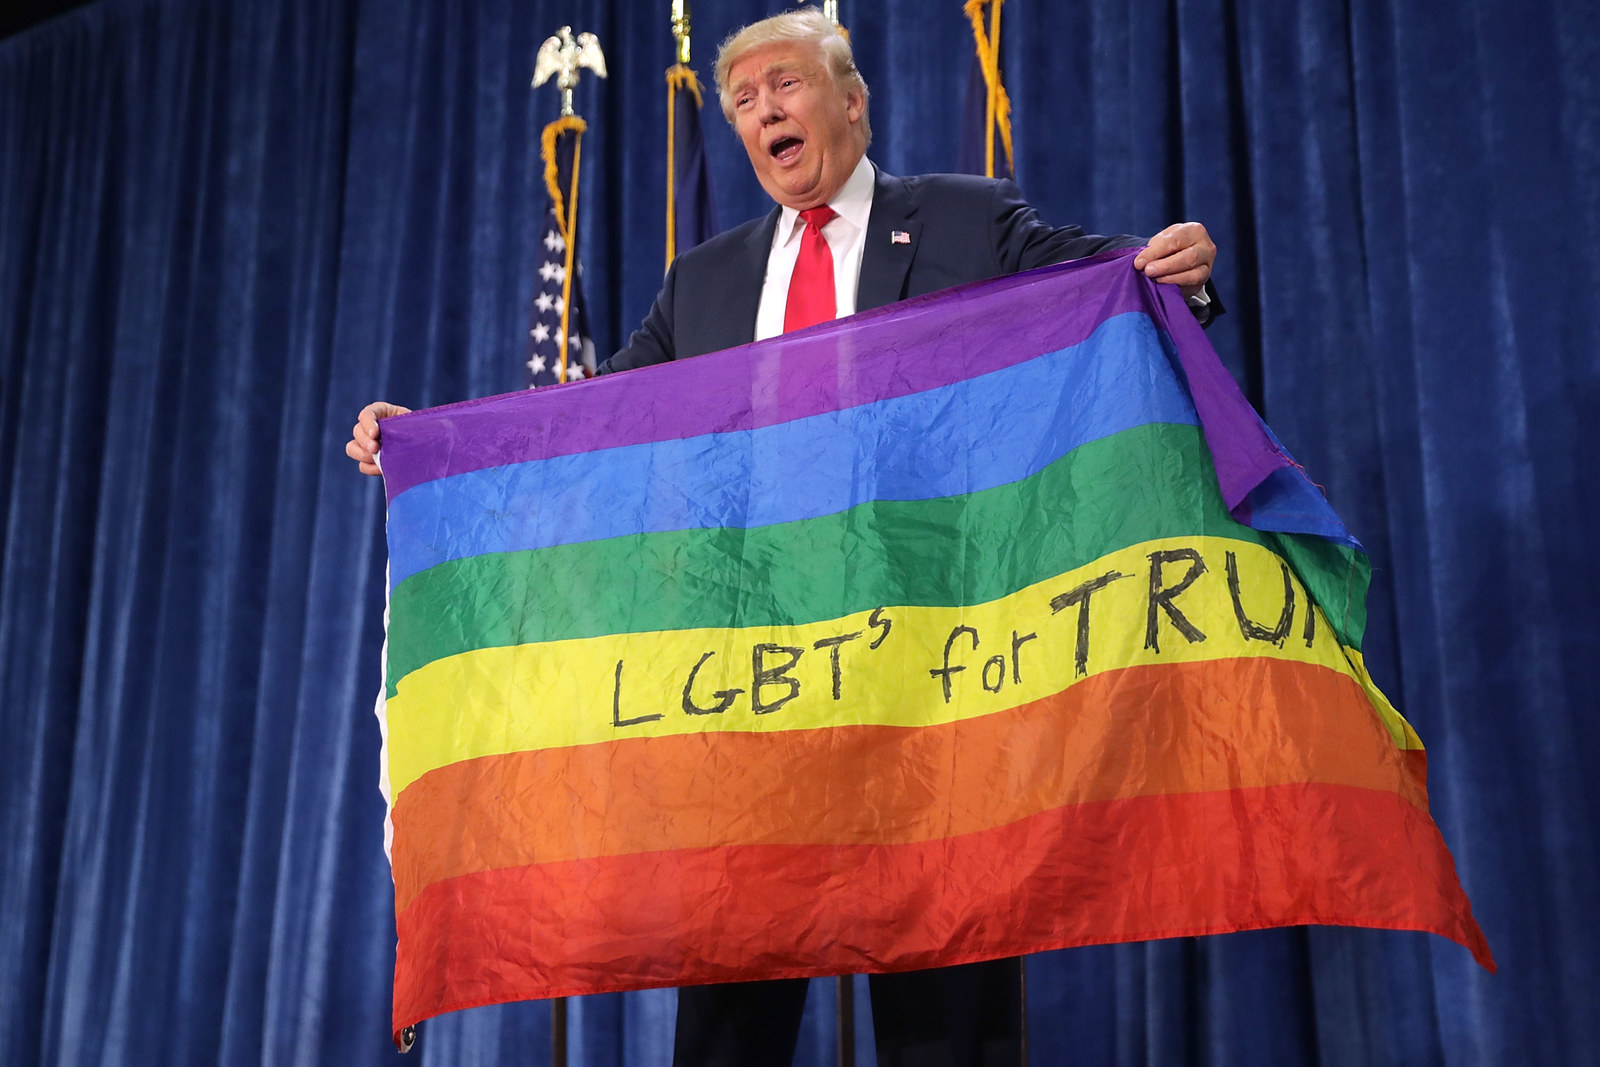 Donald Trump’s Top “lgbt” Supporters Are Largely Gay White Men